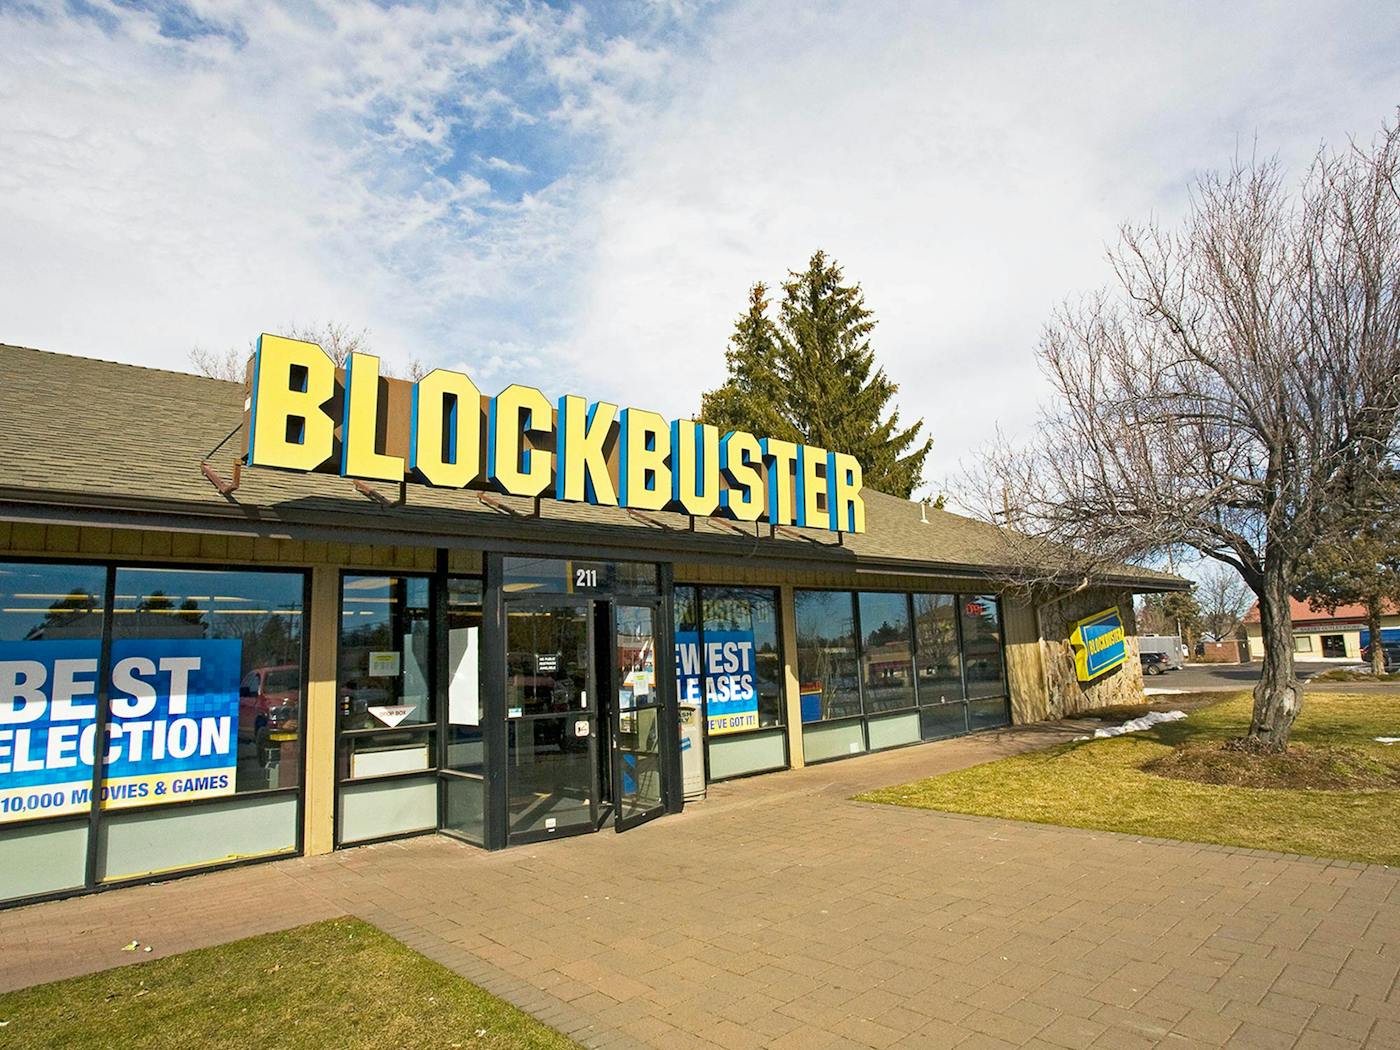 Blockbuster meaning